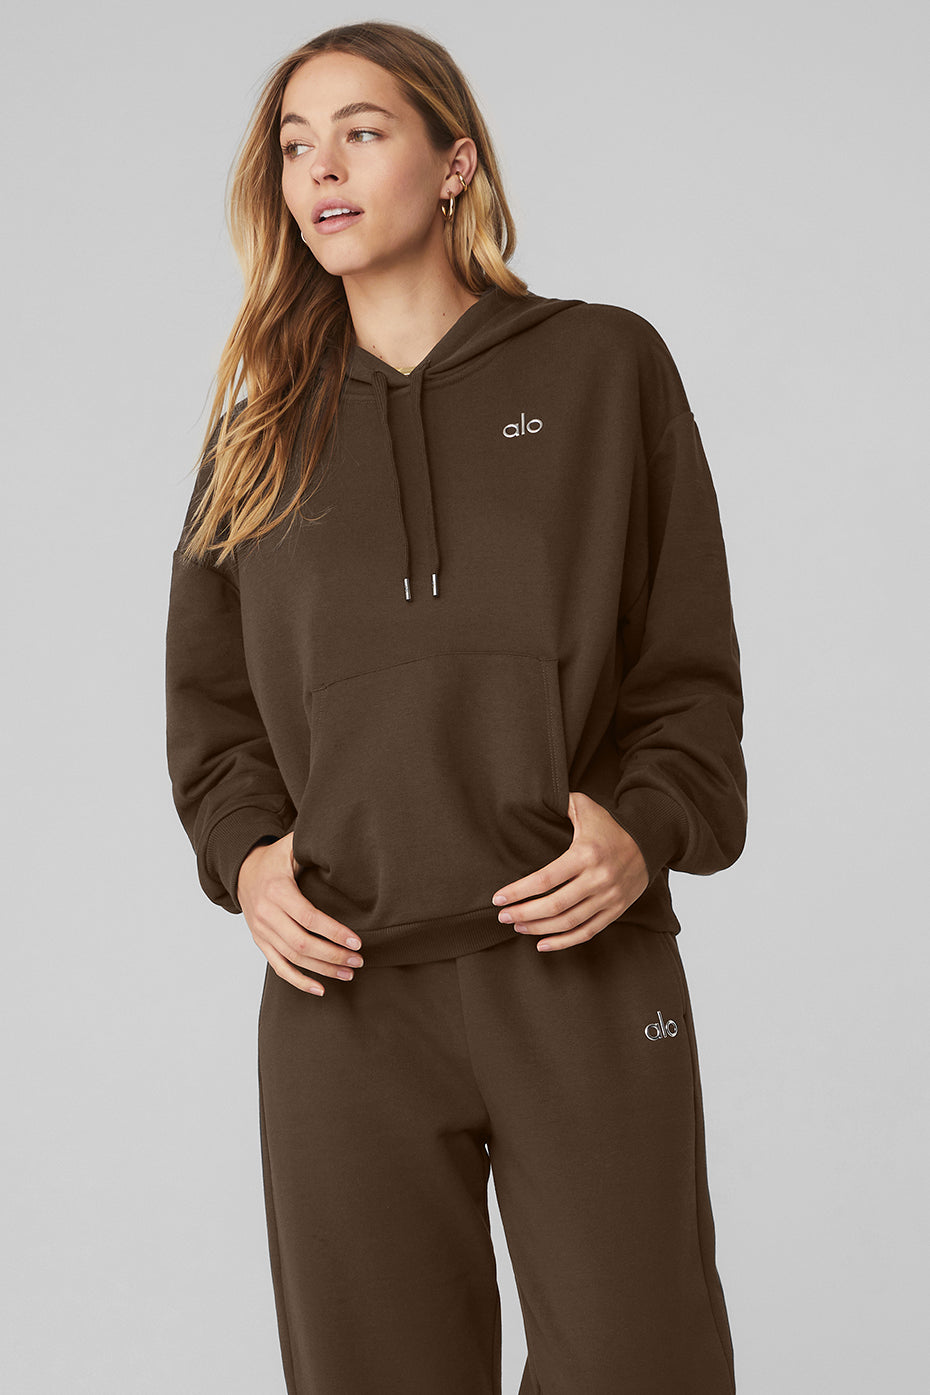 Accolade cotton-blend hoodie in grey - Alo Yoga